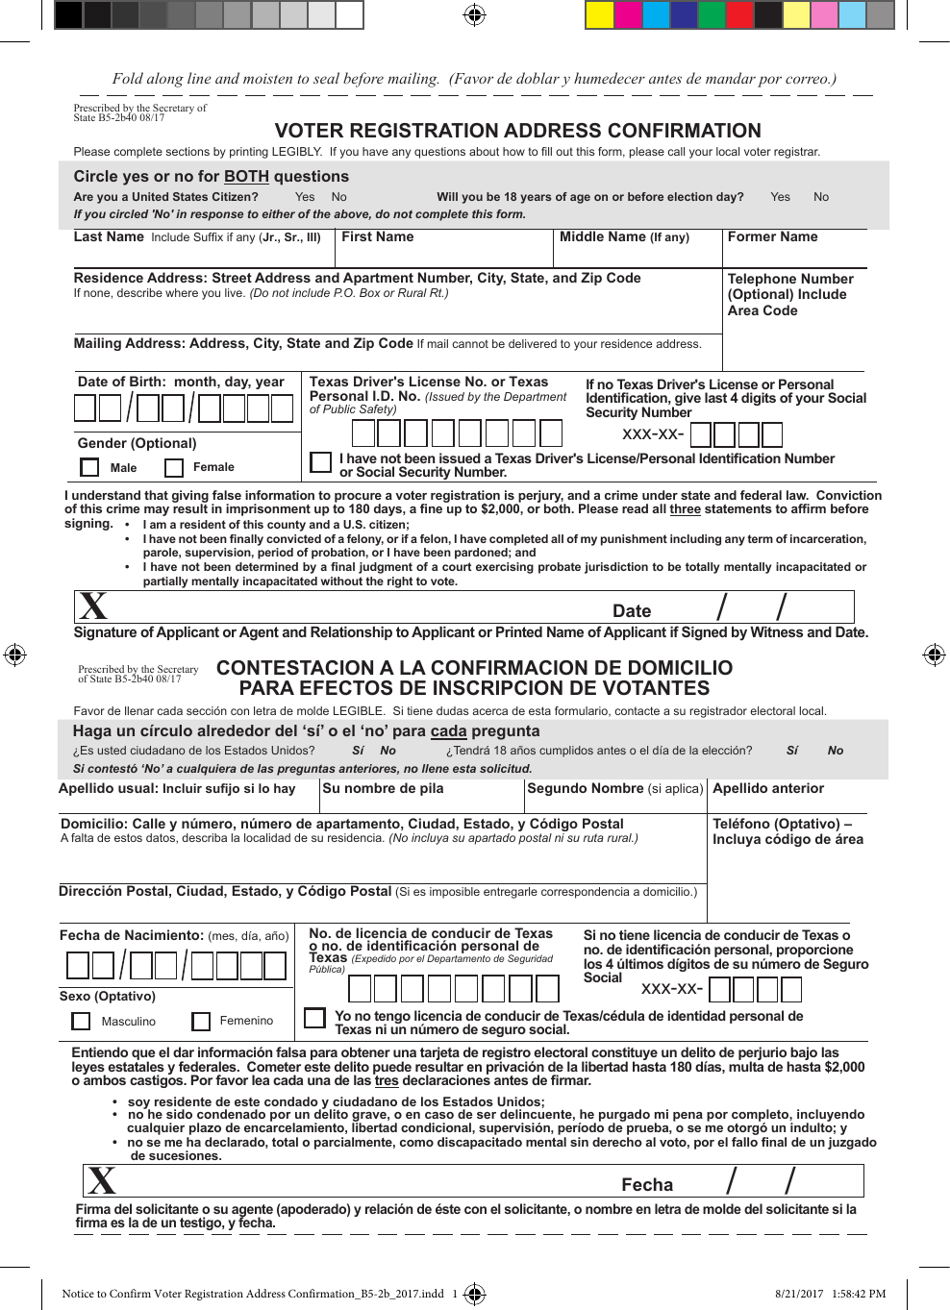 Form B5-2B Voter Registration Address Confirmation - Fold Over - Texas (English / Spanish), Page 1